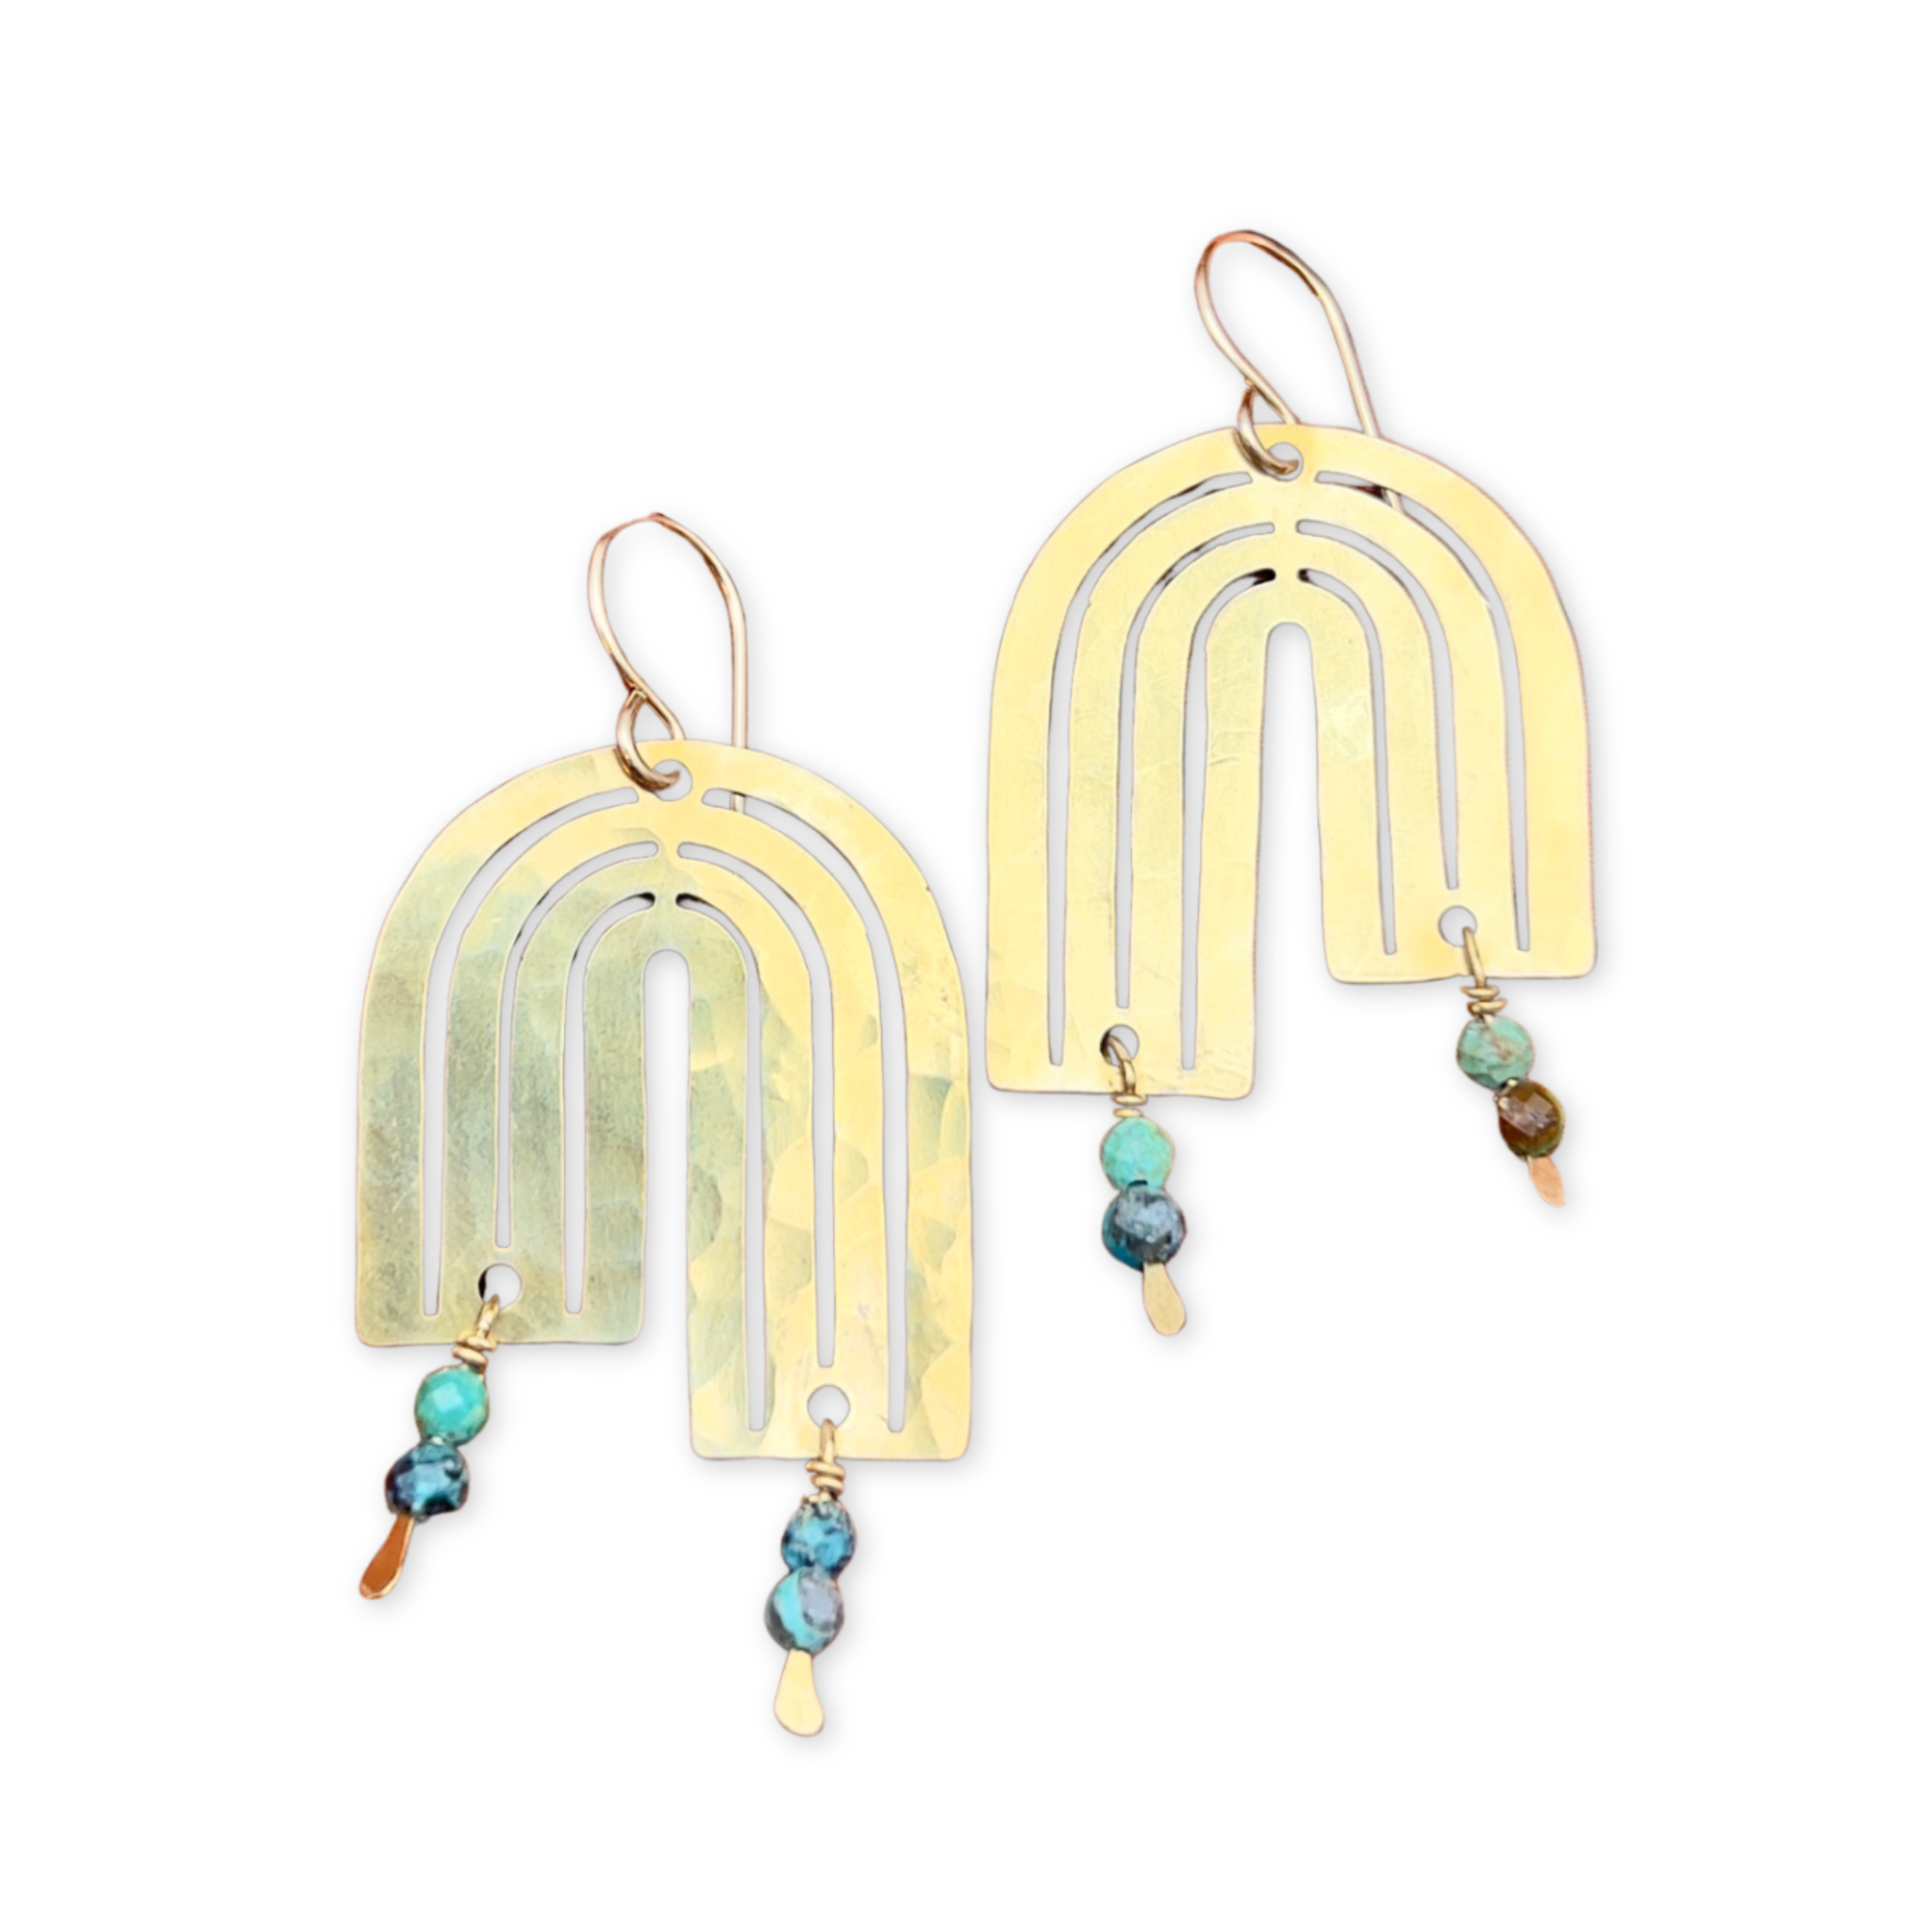 rainbow shaped dangling earrings with hanging turquoise stones